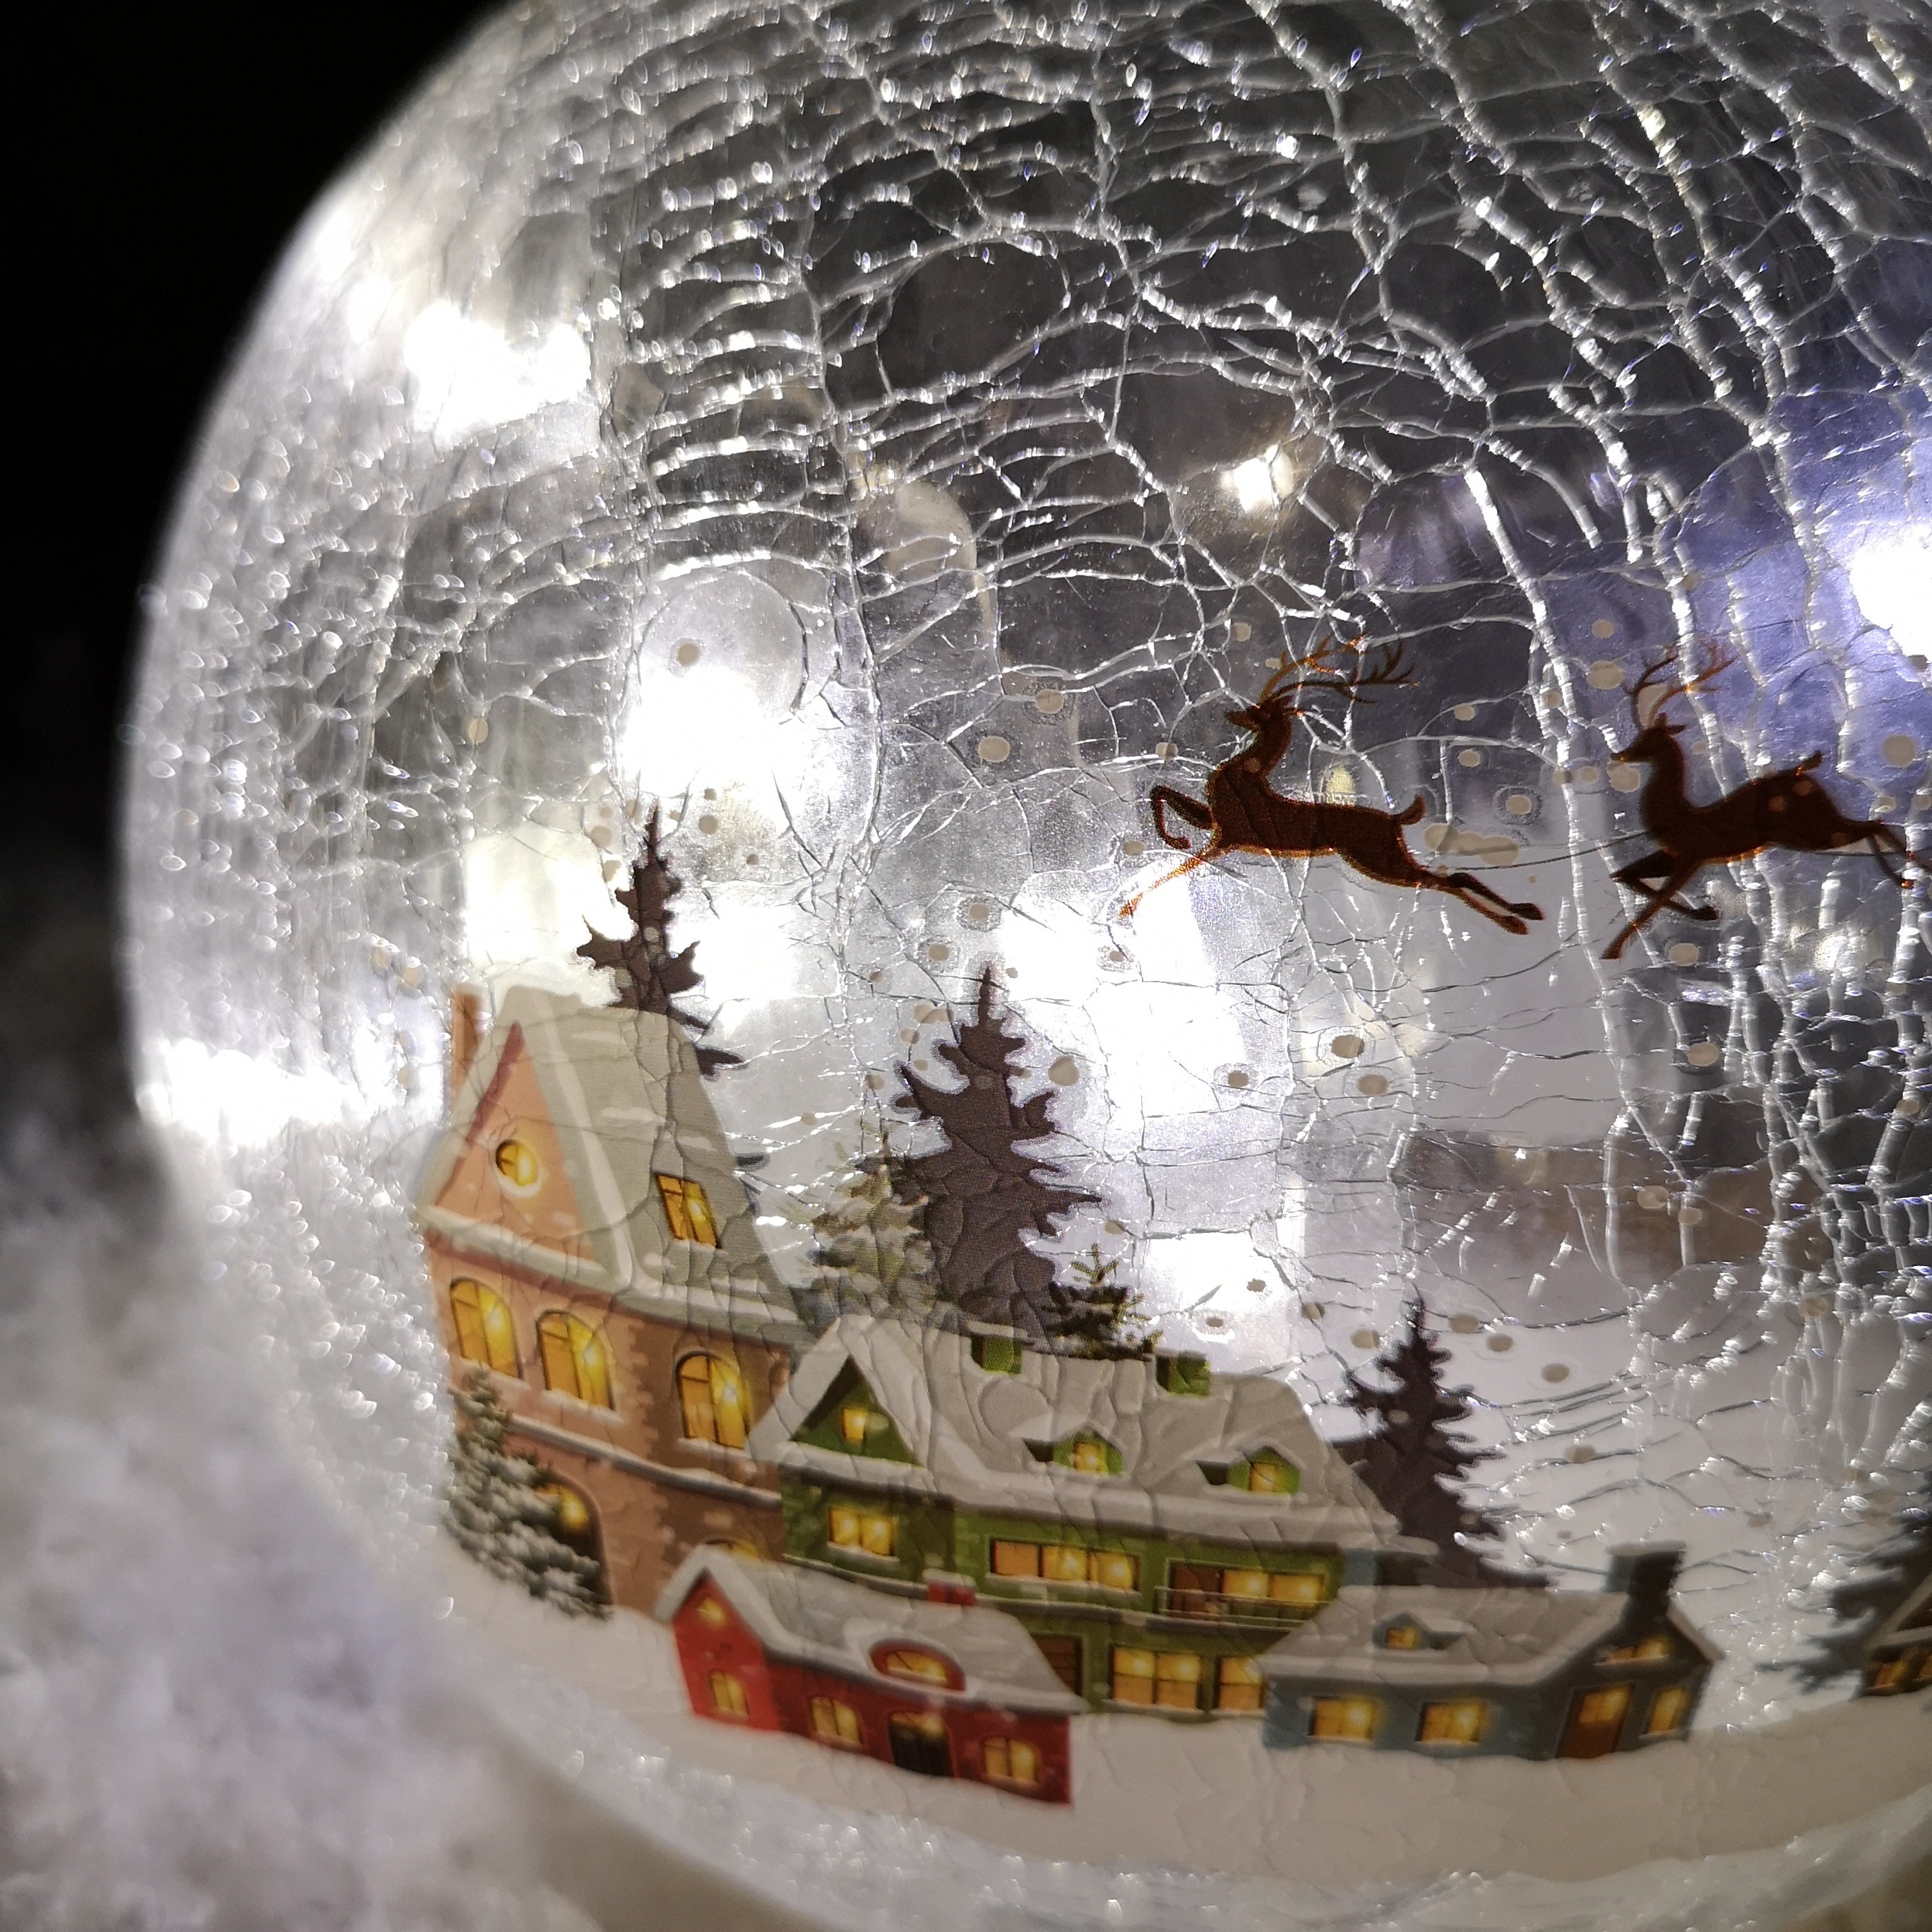 15cm Battery Operated Warm White LED Crackle Effect Ball Christmas Decoration with Village Scene